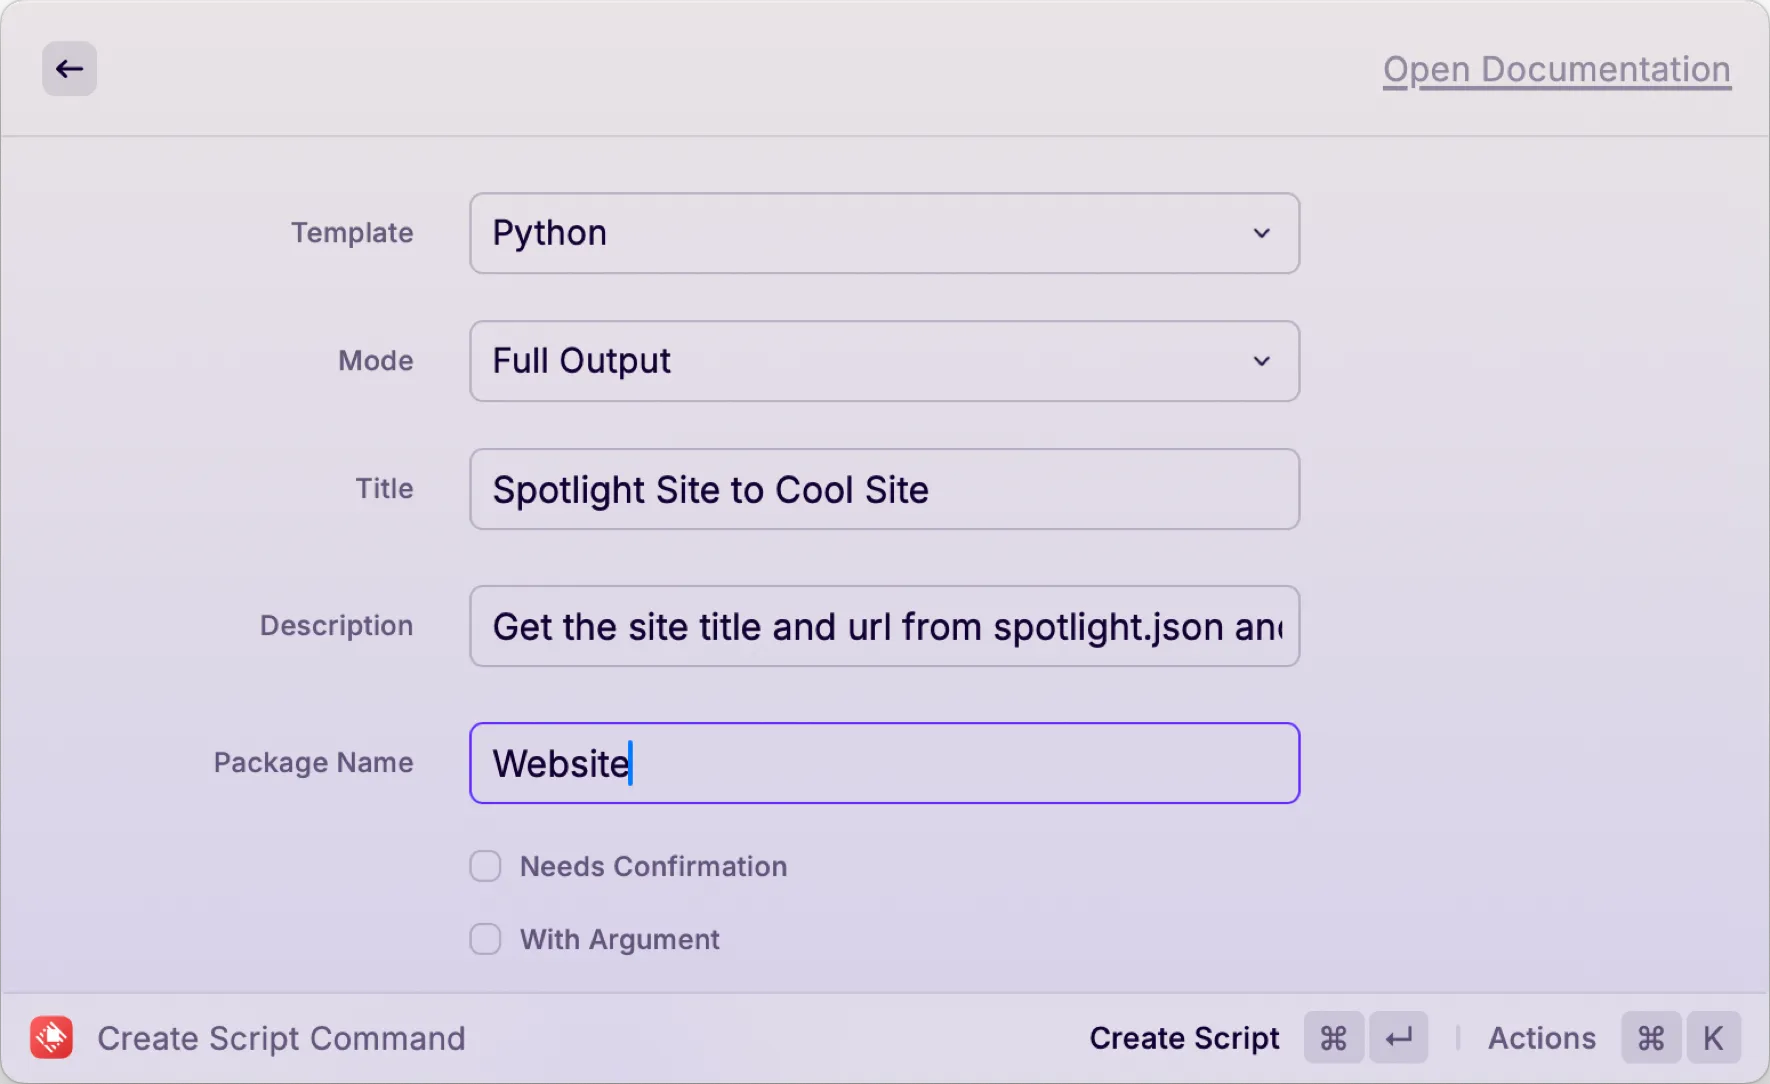 Creating the Spotlight Site to Cool Site script command